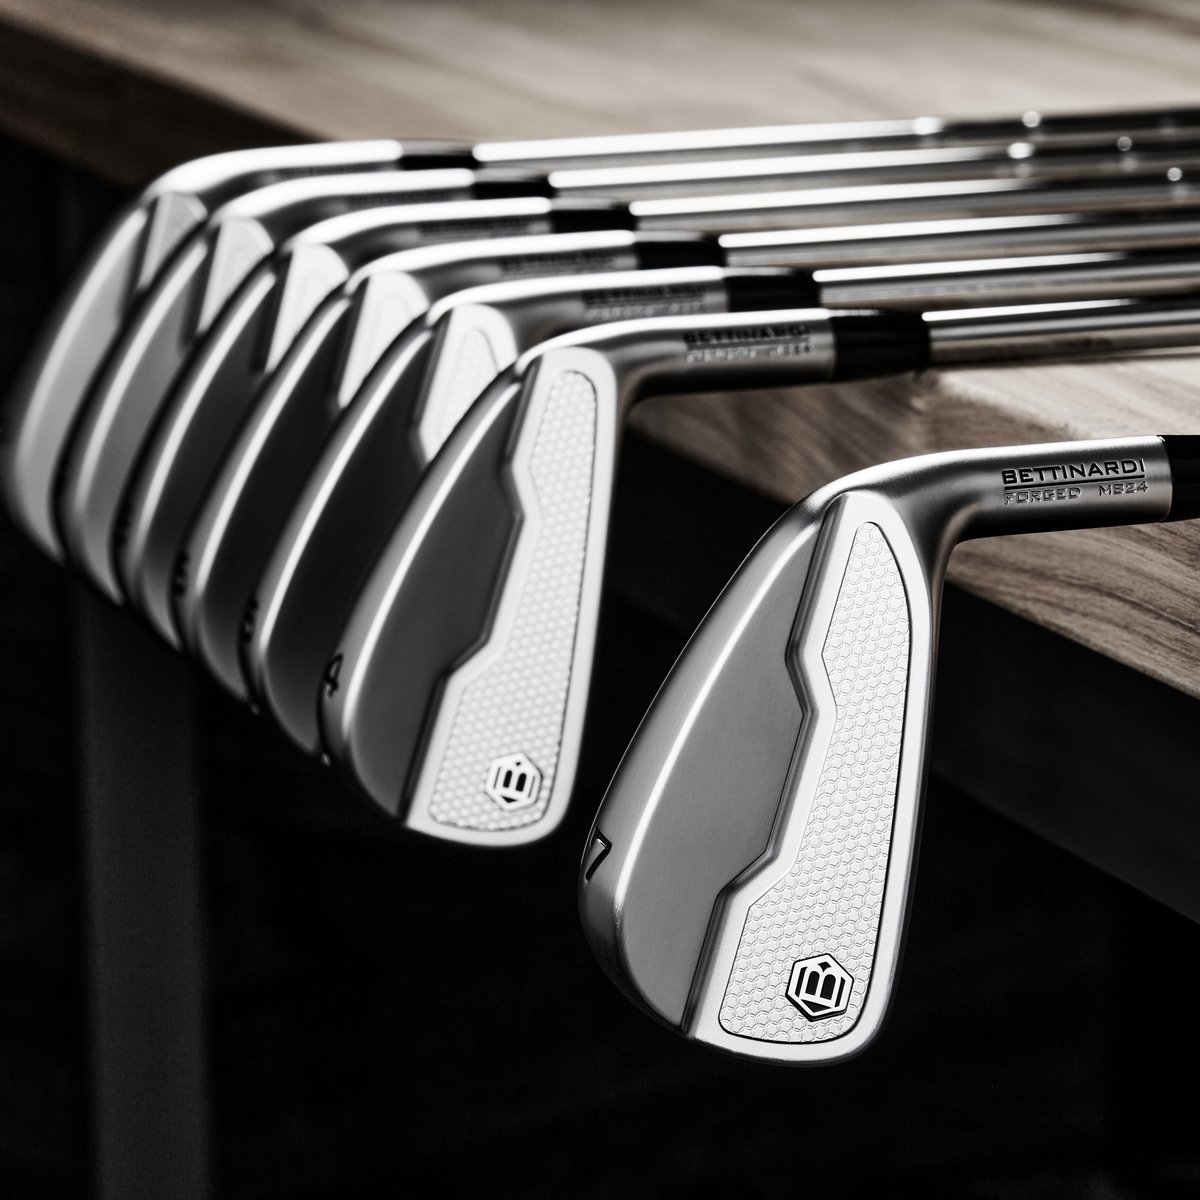 Engineered to seamlessly co-forge the interior components within the 1025 Carbon Steel chassis, our One-Piece Forging Technology delivers a solid body iron with exceptional feel that gives the player responsive feedback. #bettinardi #newlaunch #golfislife